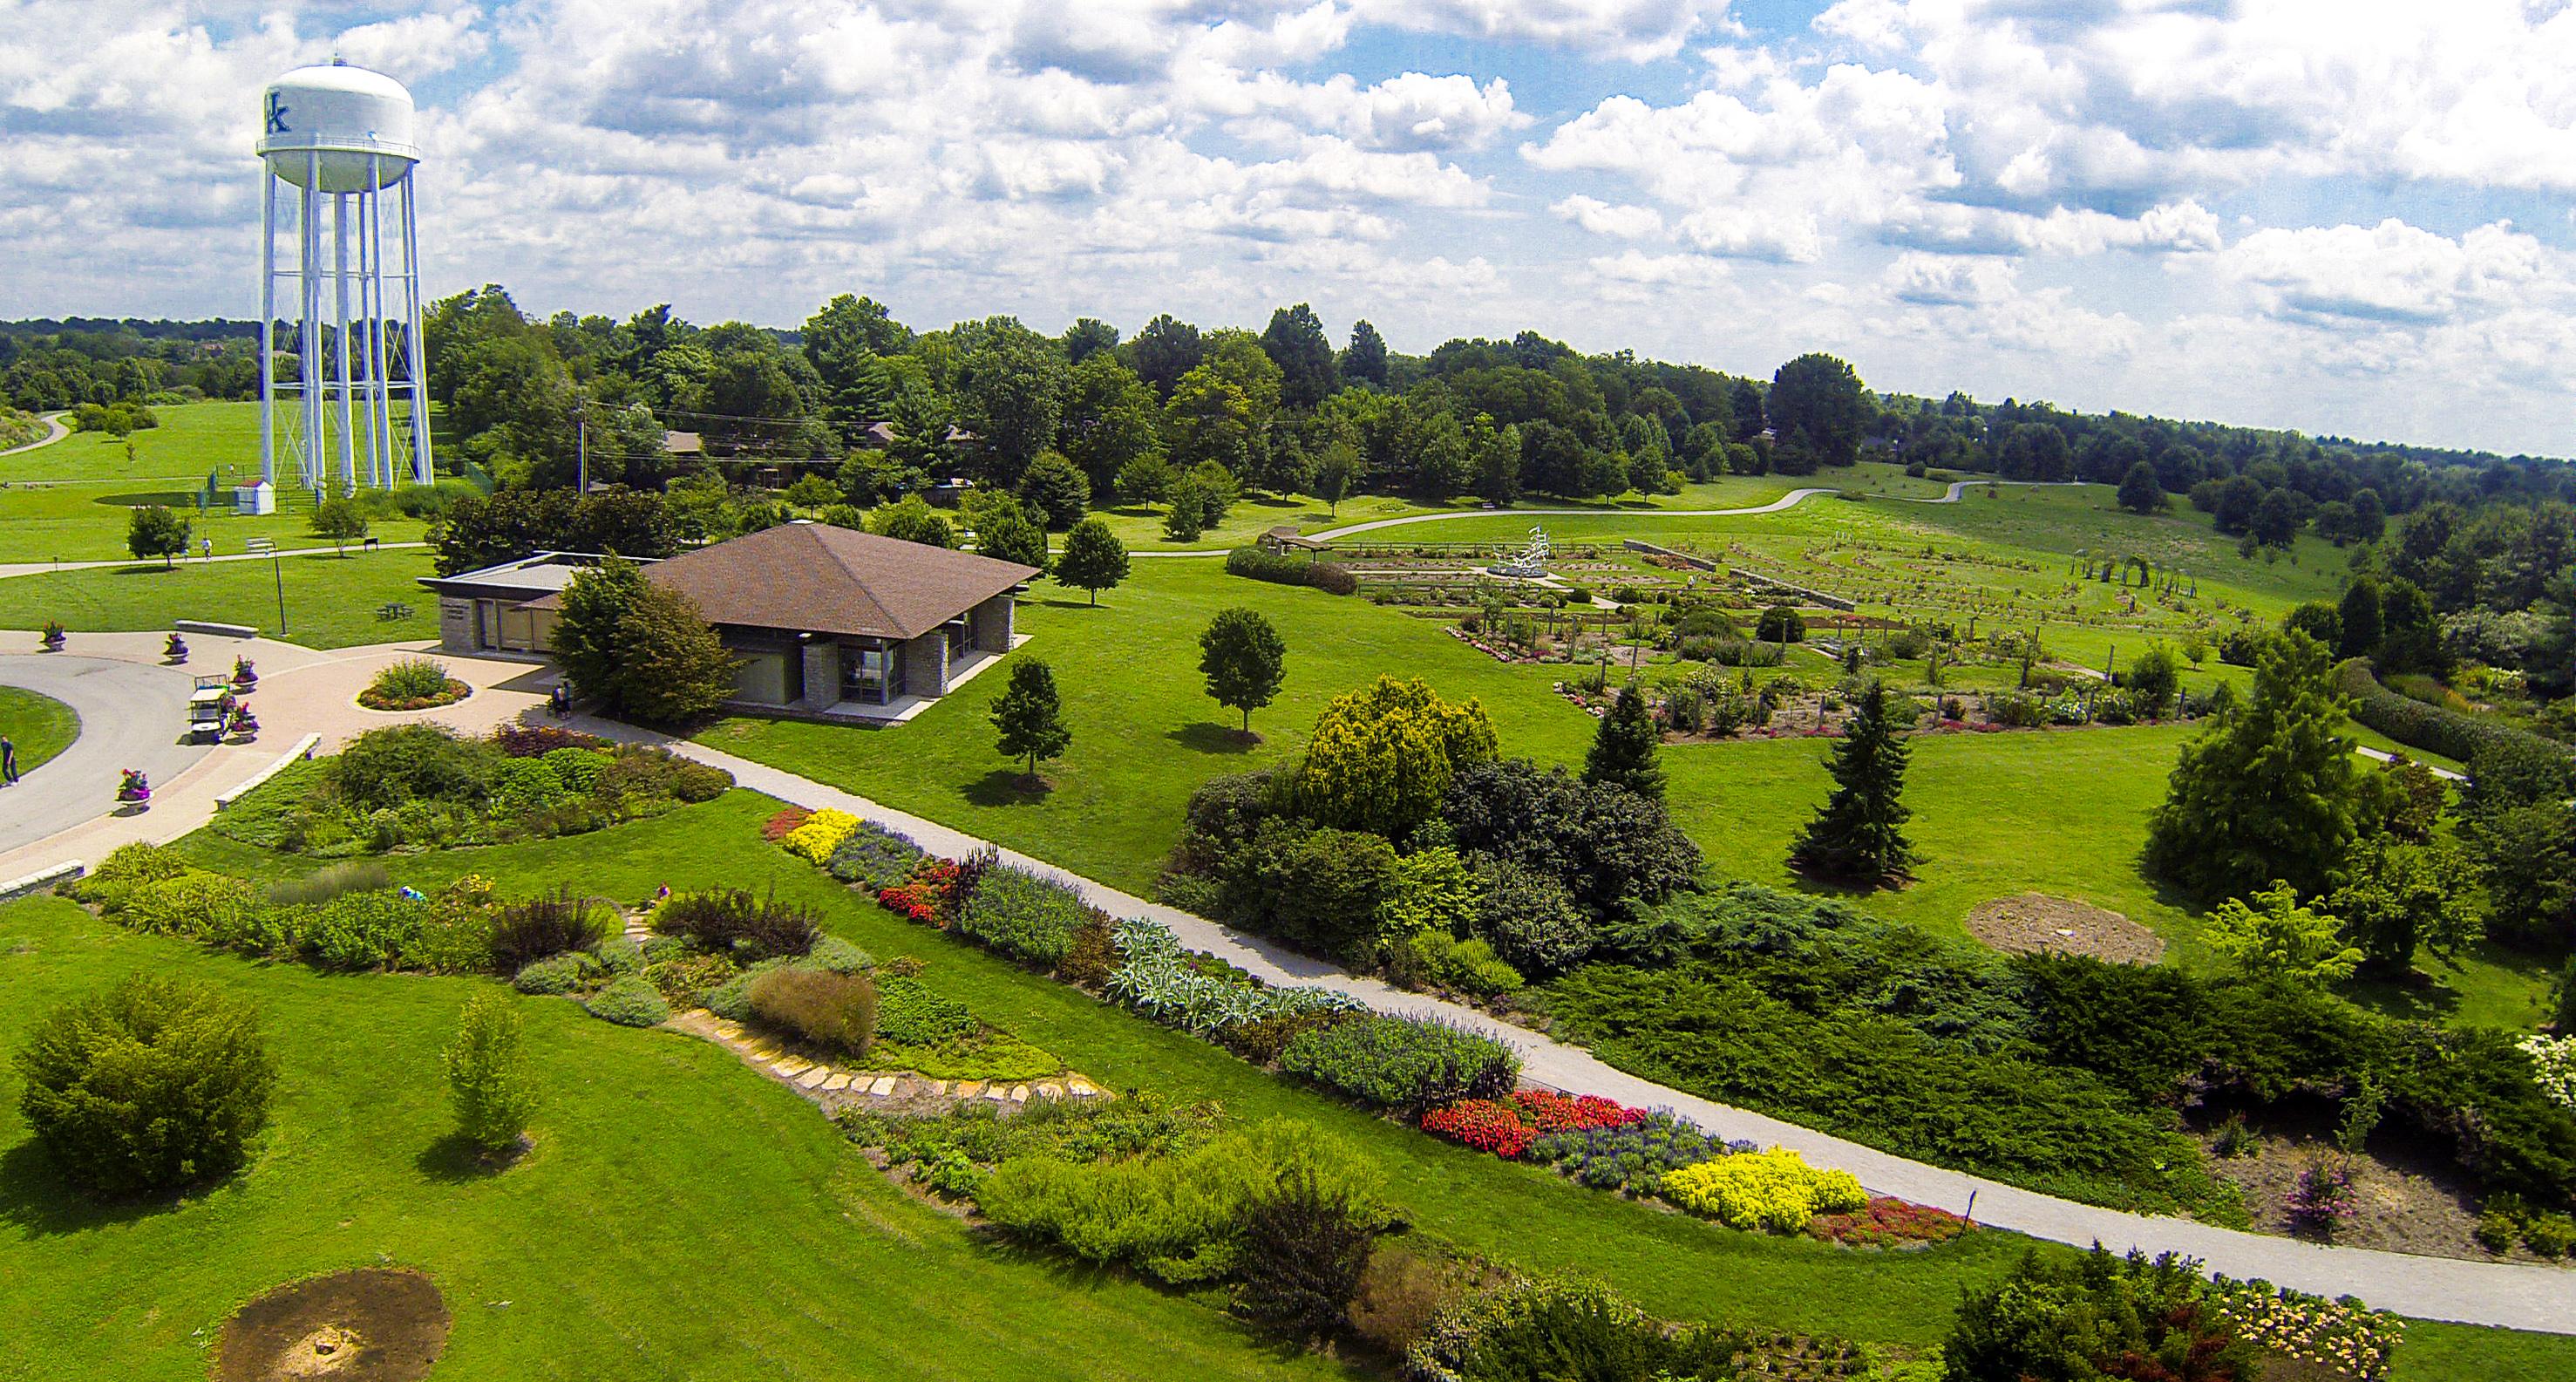 An aerial view of The Arboretum